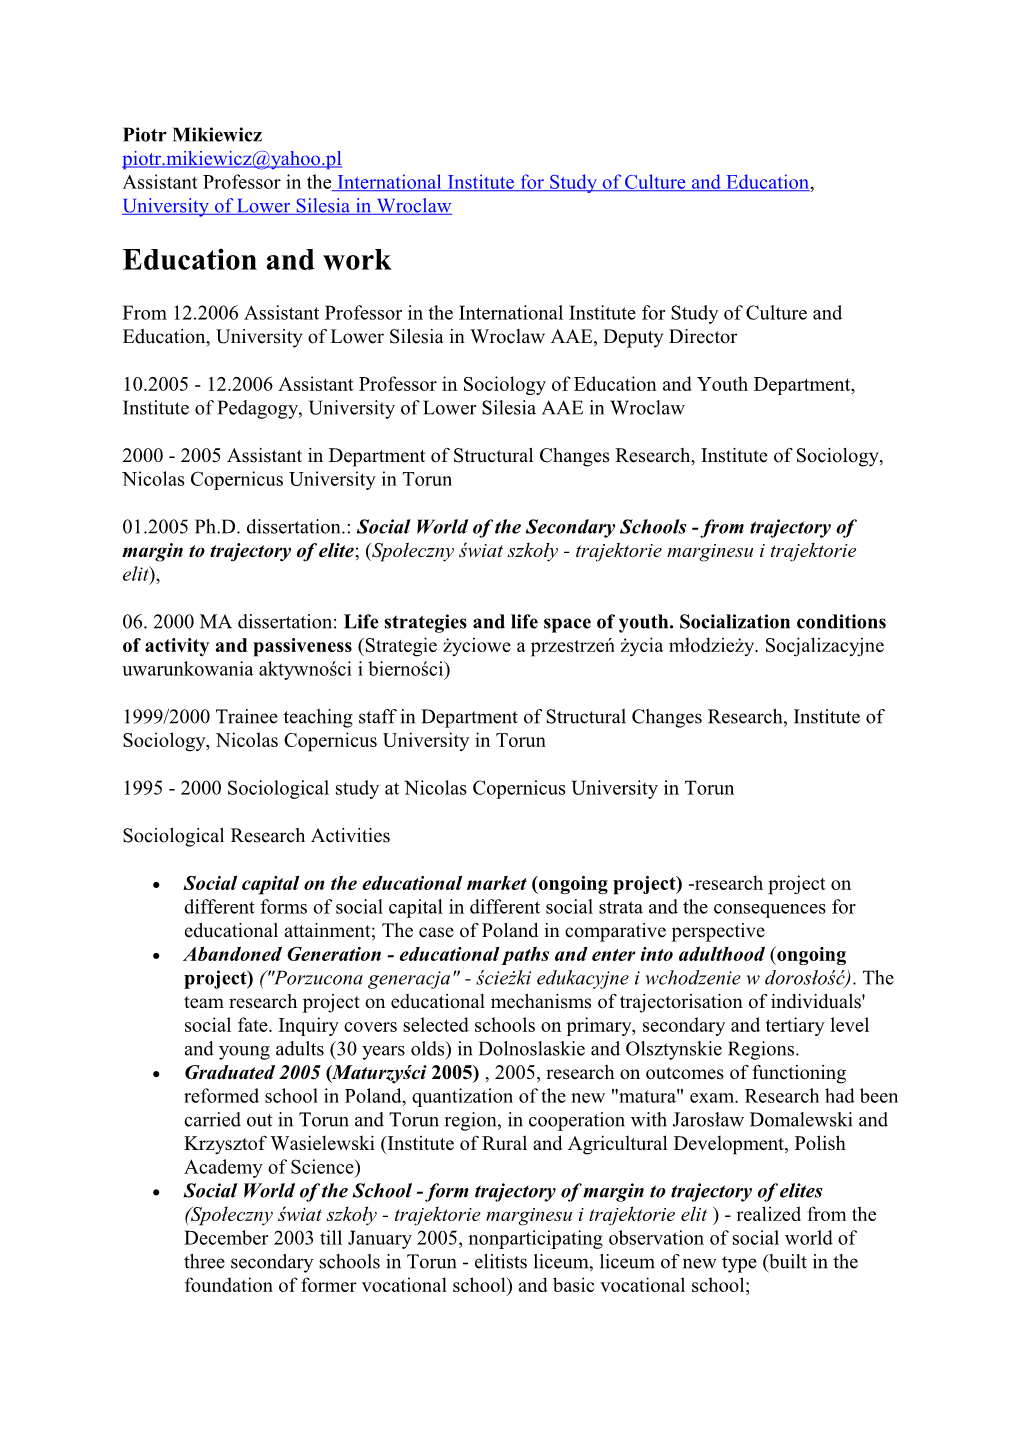 Education and Work